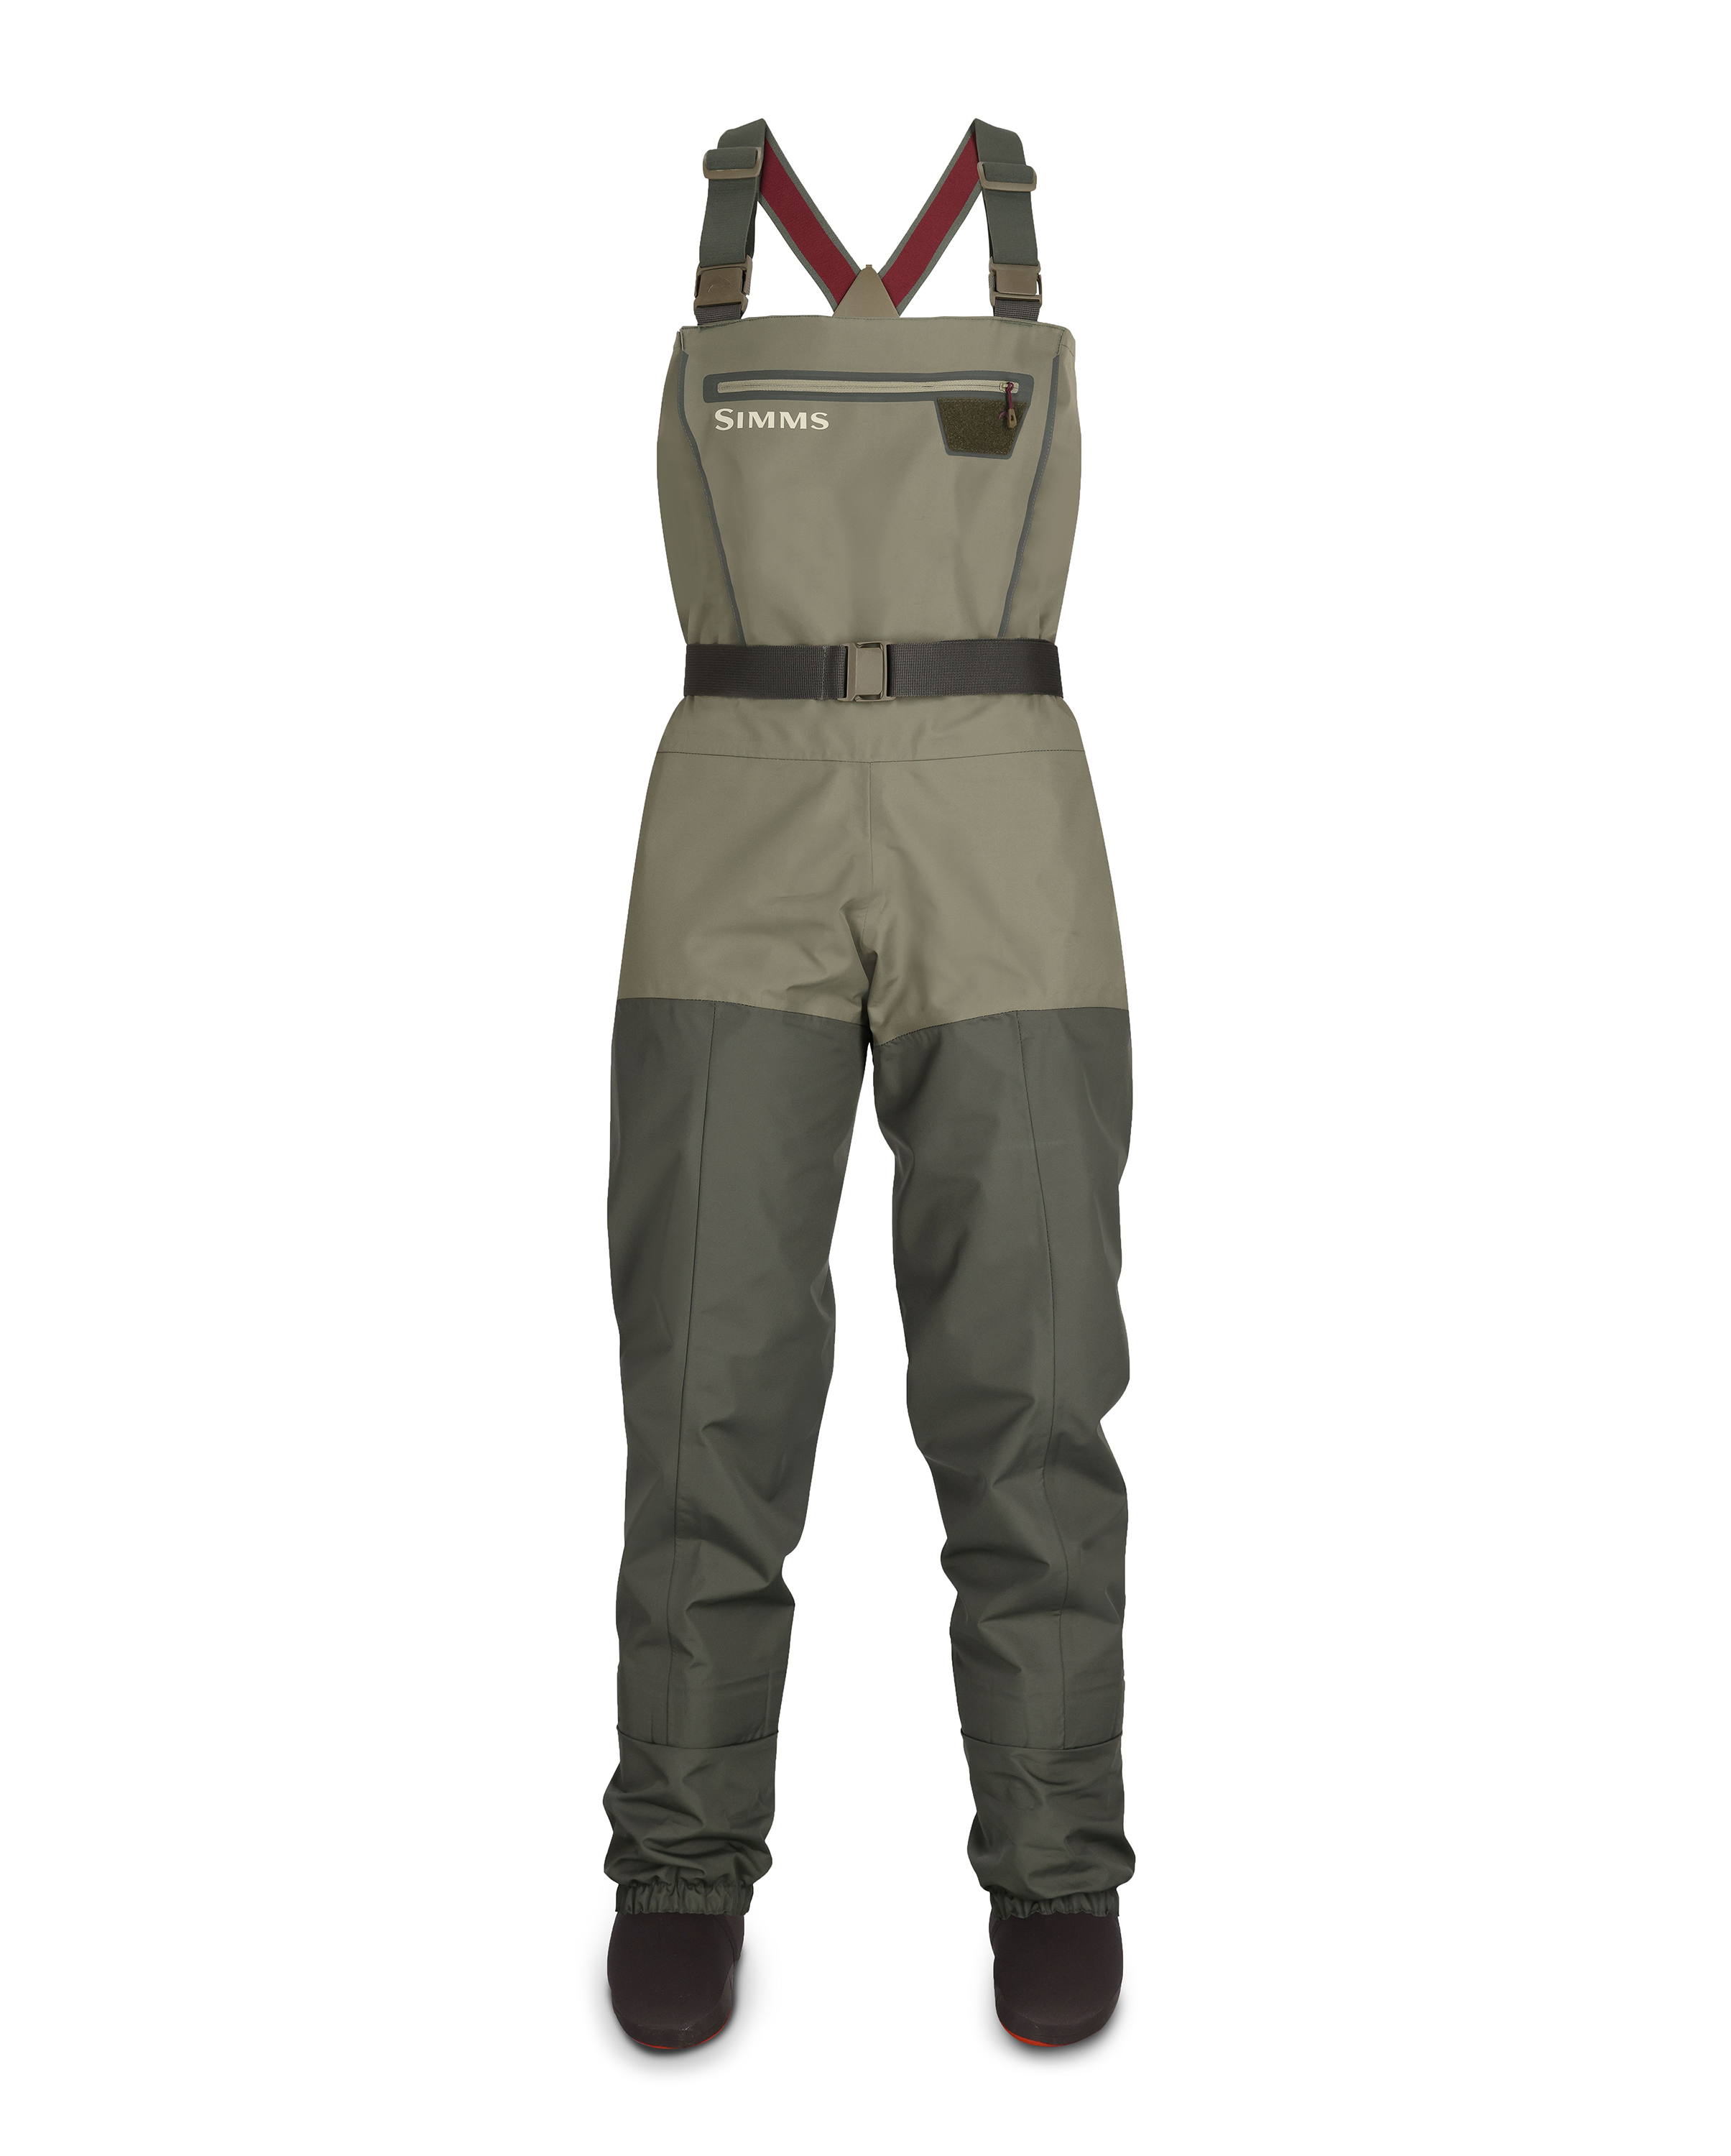 Simms Tributary Stockingfoot Waders for Ladies